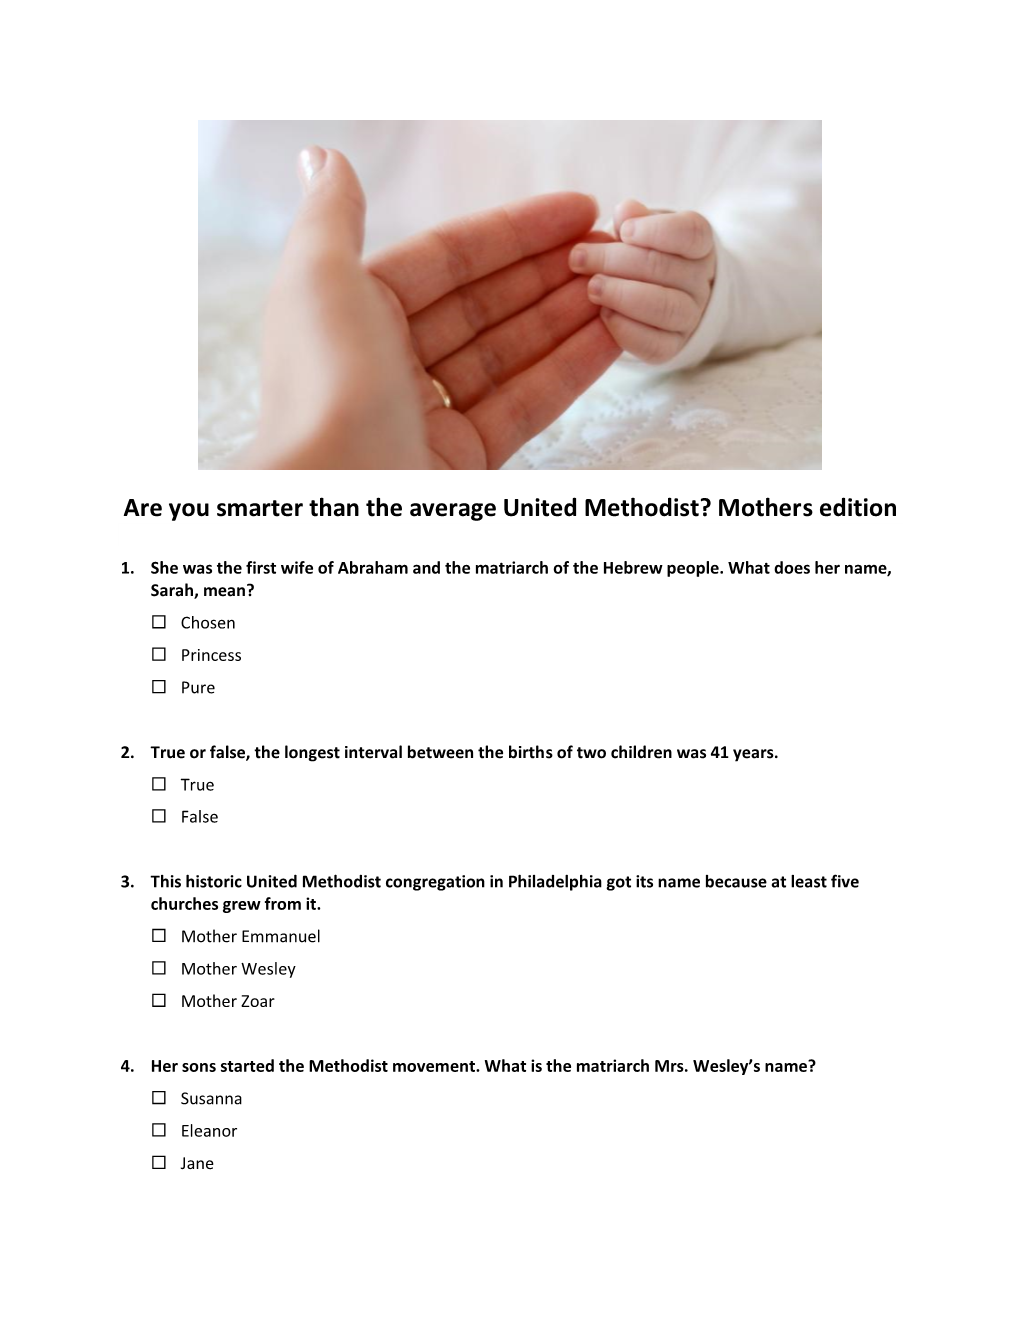 Are You Smarter Than the Average United Methodist? Mothers Edition